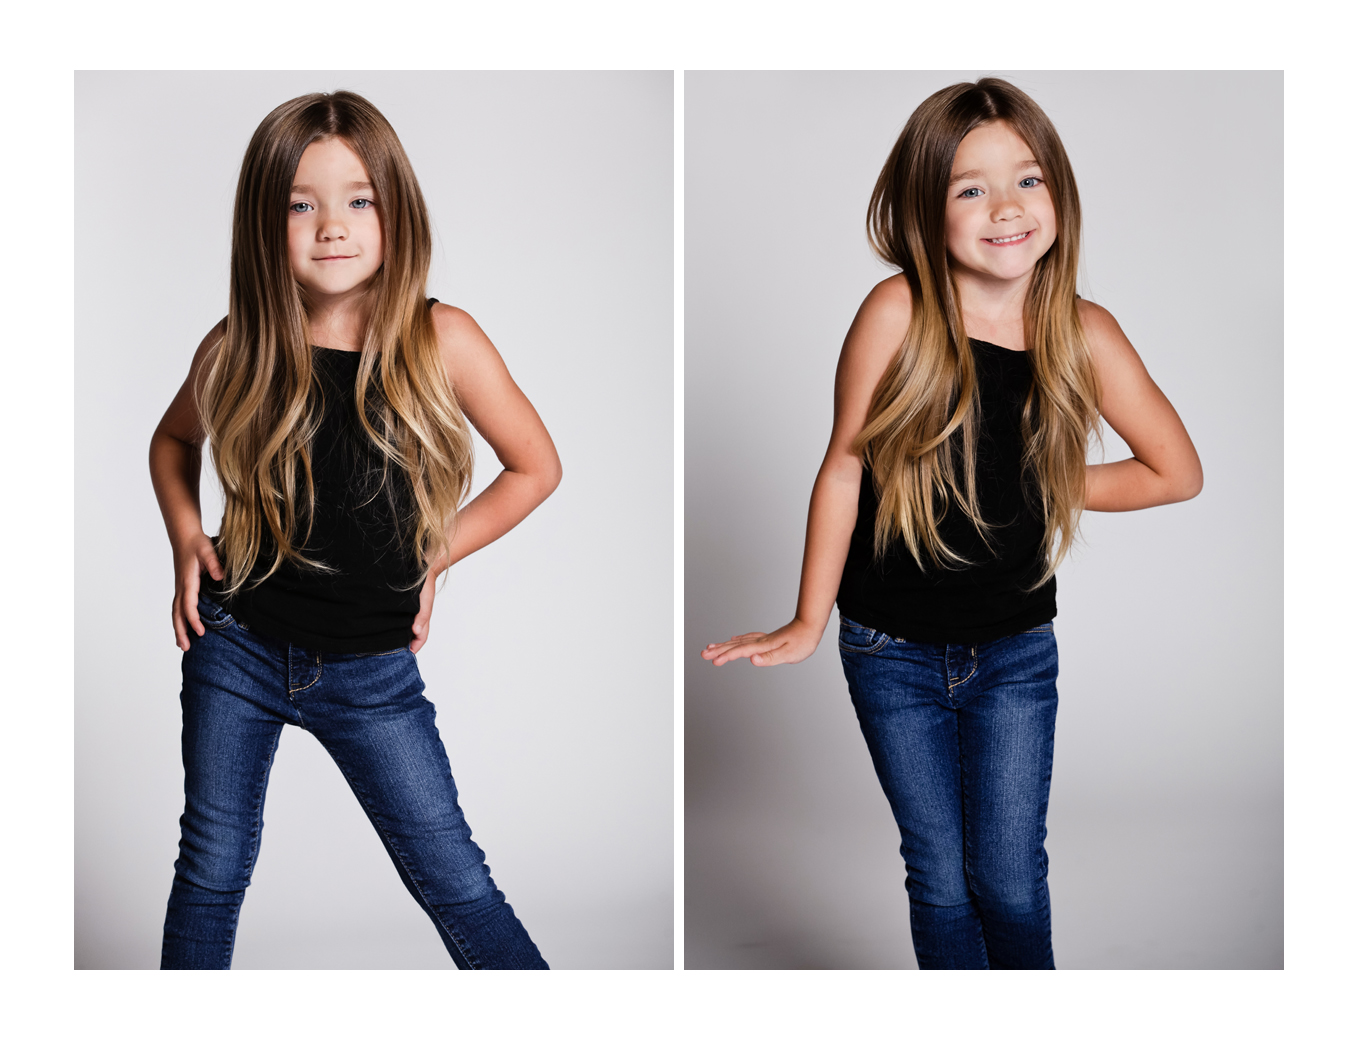 A young girl models with a smile facing the photographer wearing a black top and blue jeans while her wavy blonde hair cascades over her shoulders